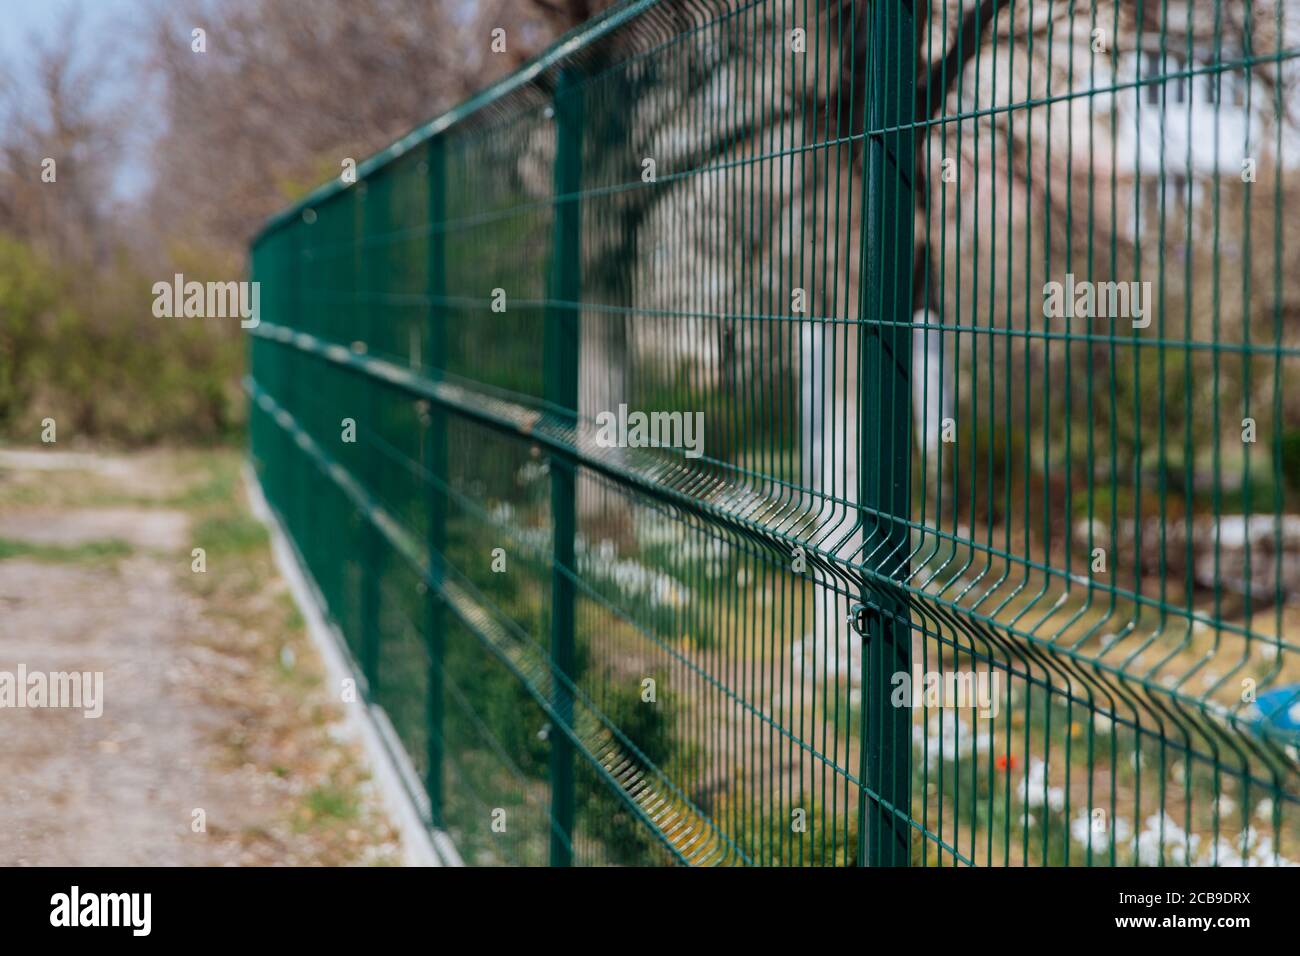 Steel grill. Green fence with wire. Fencing. Stock Photo